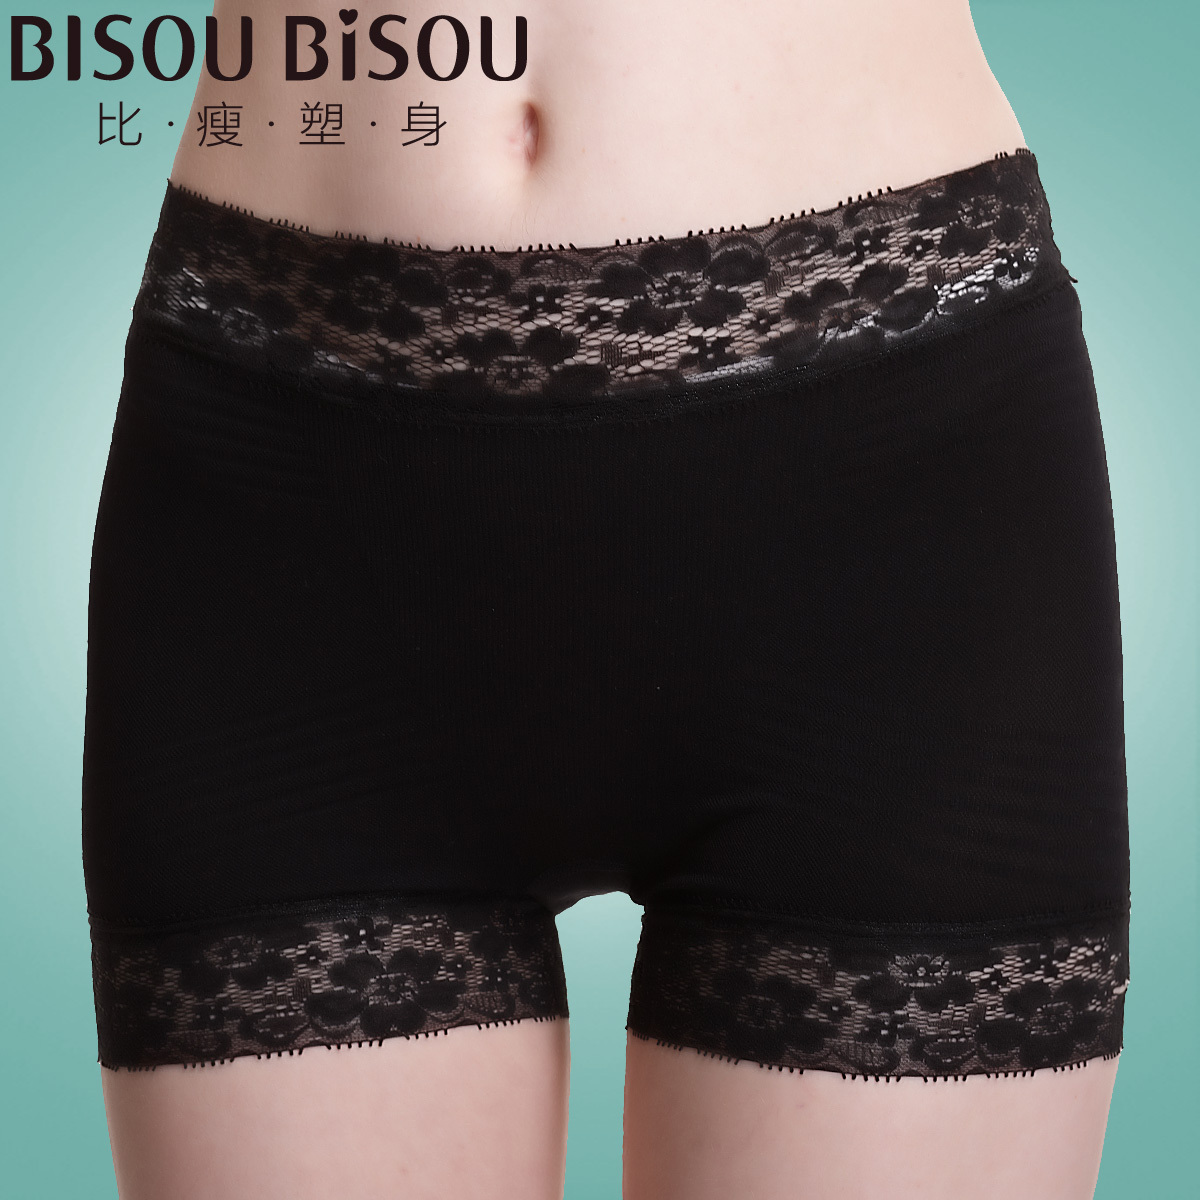 Bisou bisou butt-lifting abdomen drawing safety pants body shaping lace sexy panties